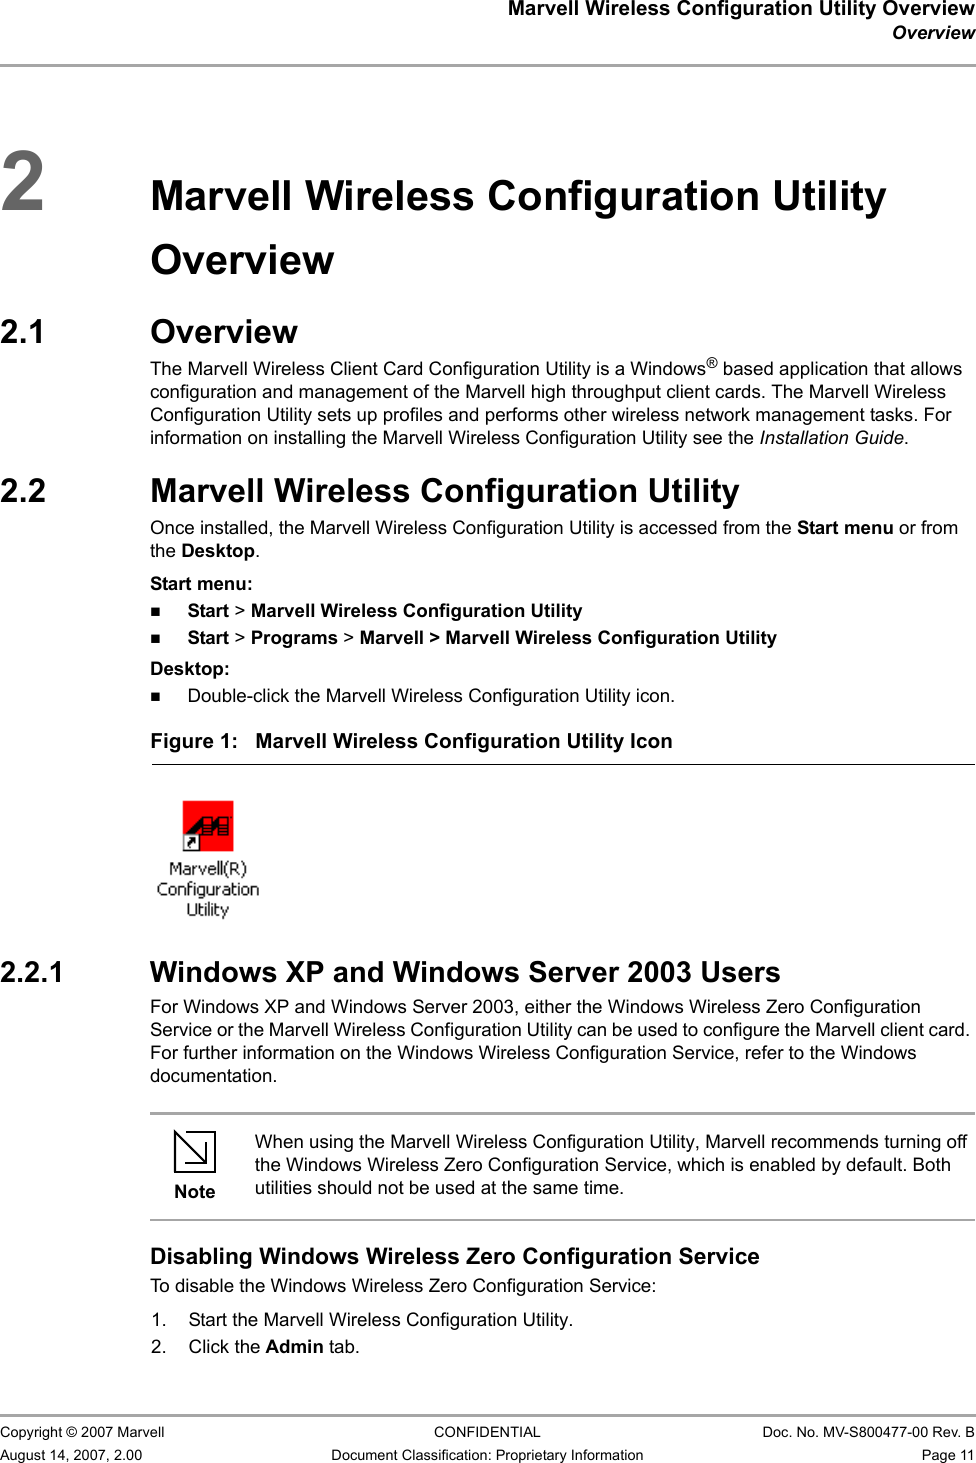 Marvell Wireless Configuration Utility OverviewOverview                         Copyright © 2007 Marvell CONFIDENTIAL Doc. No. MV-S800477-00 Rev. BAugust 14, 2007, 2.00 Document Classification: Proprietary Information Page 11 2Marvell Wireless Configuration Utility Overview2.1 OverviewThe Marvell Wireless Client Card Configuration Utility is a Windows® based application that allows configuration and management of the Marvell high throughput client cards. The Marvell Wireless Configuration Utility sets up profiles and performs other wireless network management tasks. For information on installing the Marvell Wireless Configuration Utility see the Installation Guide.2.2 Marvell Wireless Configuration UtilityOnce installed, the Marvell Wireless Configuration Utility is accessed from the Start menu or from the Desktop.Start menu:Start &gt; Marvell Wireless Configuration UtilityStart &gt; Programs &gt; Marvell &gt; Marvell Wireless Configuration UtilityDesktop:Double-click the Marvell Wireless Configuration Utility icon.2.2.1 Windows XP and Windows Server 2003 UsersFor Windows XP and Windows Server 2003, either the Windows Wireless Zero Configuration Service or the Marvell Wireless Configuration Utility can be used to configure the Marvell client card. For further information on the Windows Wireless Configuration Service, refer to the Windows documentation.Disabling Windows Wireless Zero Configuration ServiceTo disable the Windows Wireless Zero Configuration Service:1. Start the Marvell Wireless Configuration Utility.2. Click the Admin tab.Figure 1: Marvell Wireless Configuration Utility Icon                         NoteWhen using the Marvell Wireless Configuration Utility, Marvell recommends turning off the Windows Wireless Zero Configuration Service, which is enabled by default. Both utilities should not be used at the same time.